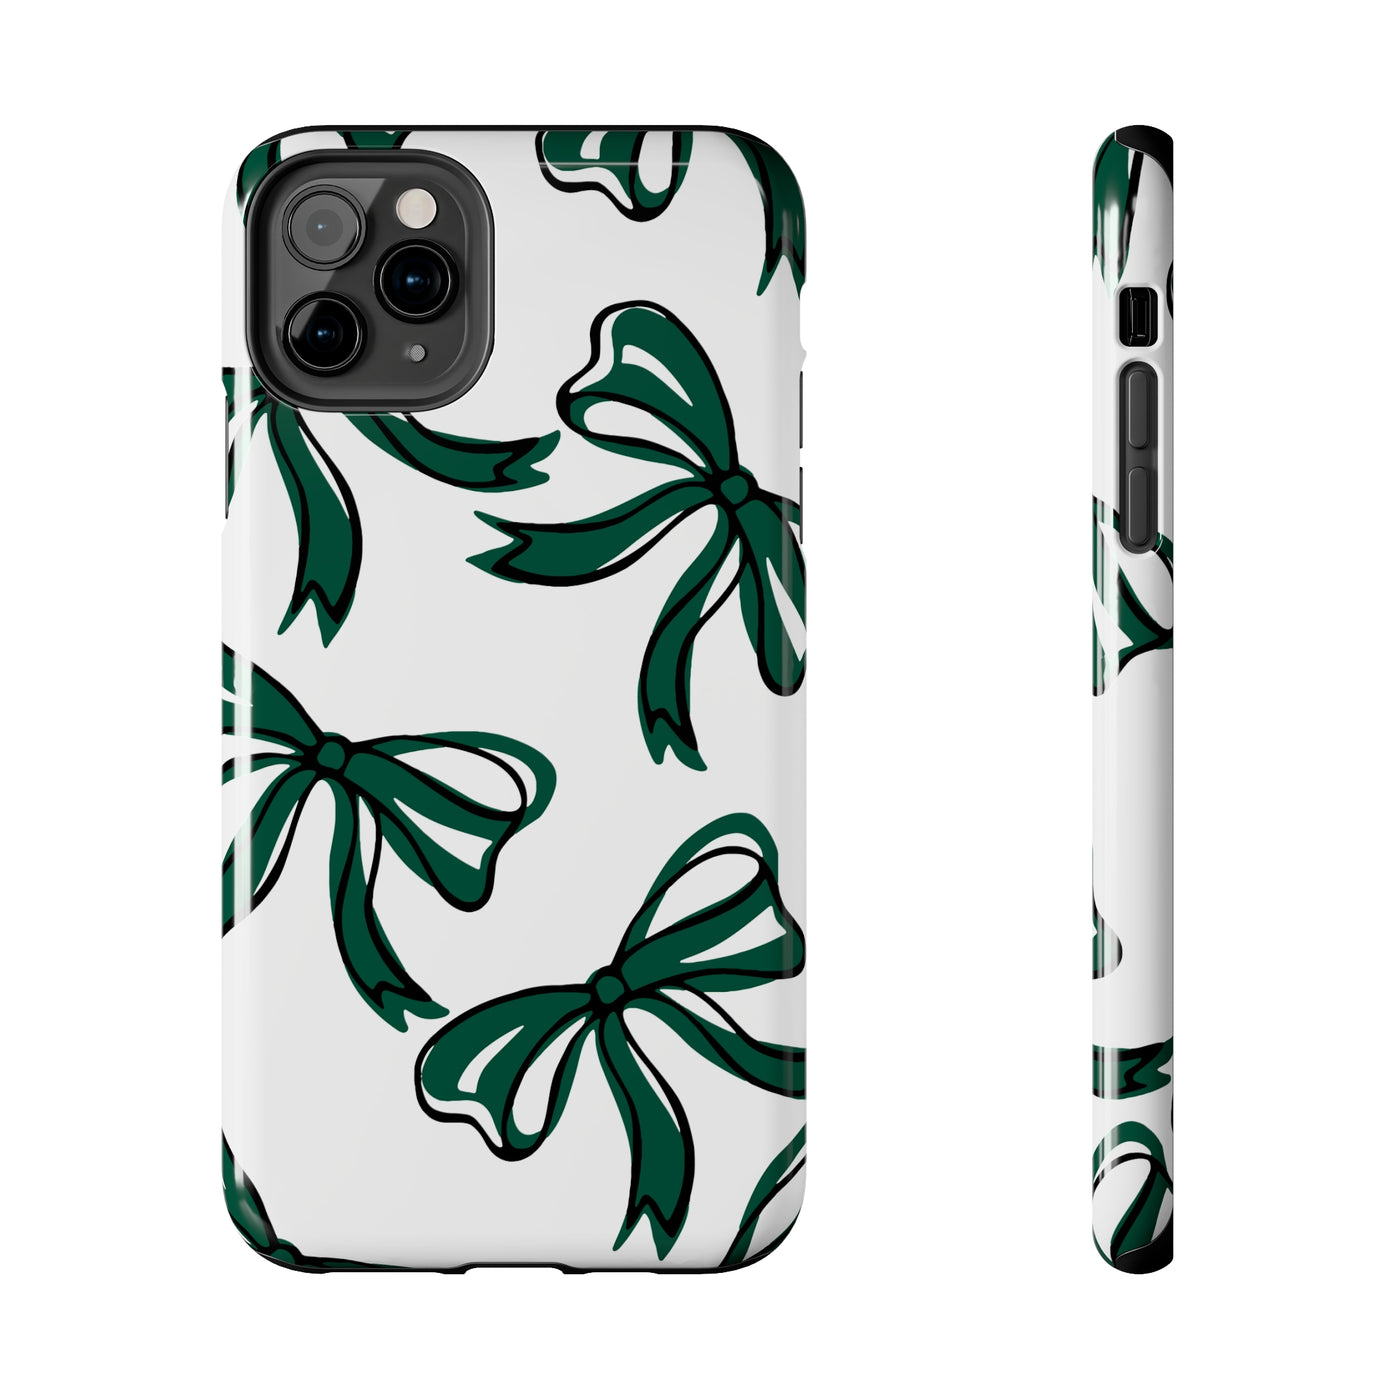 Trendy Bow Phone Case, Bed Party Bow Iphone case, Bow Phone Case, - Michigan State, Spartans, BING, green and white